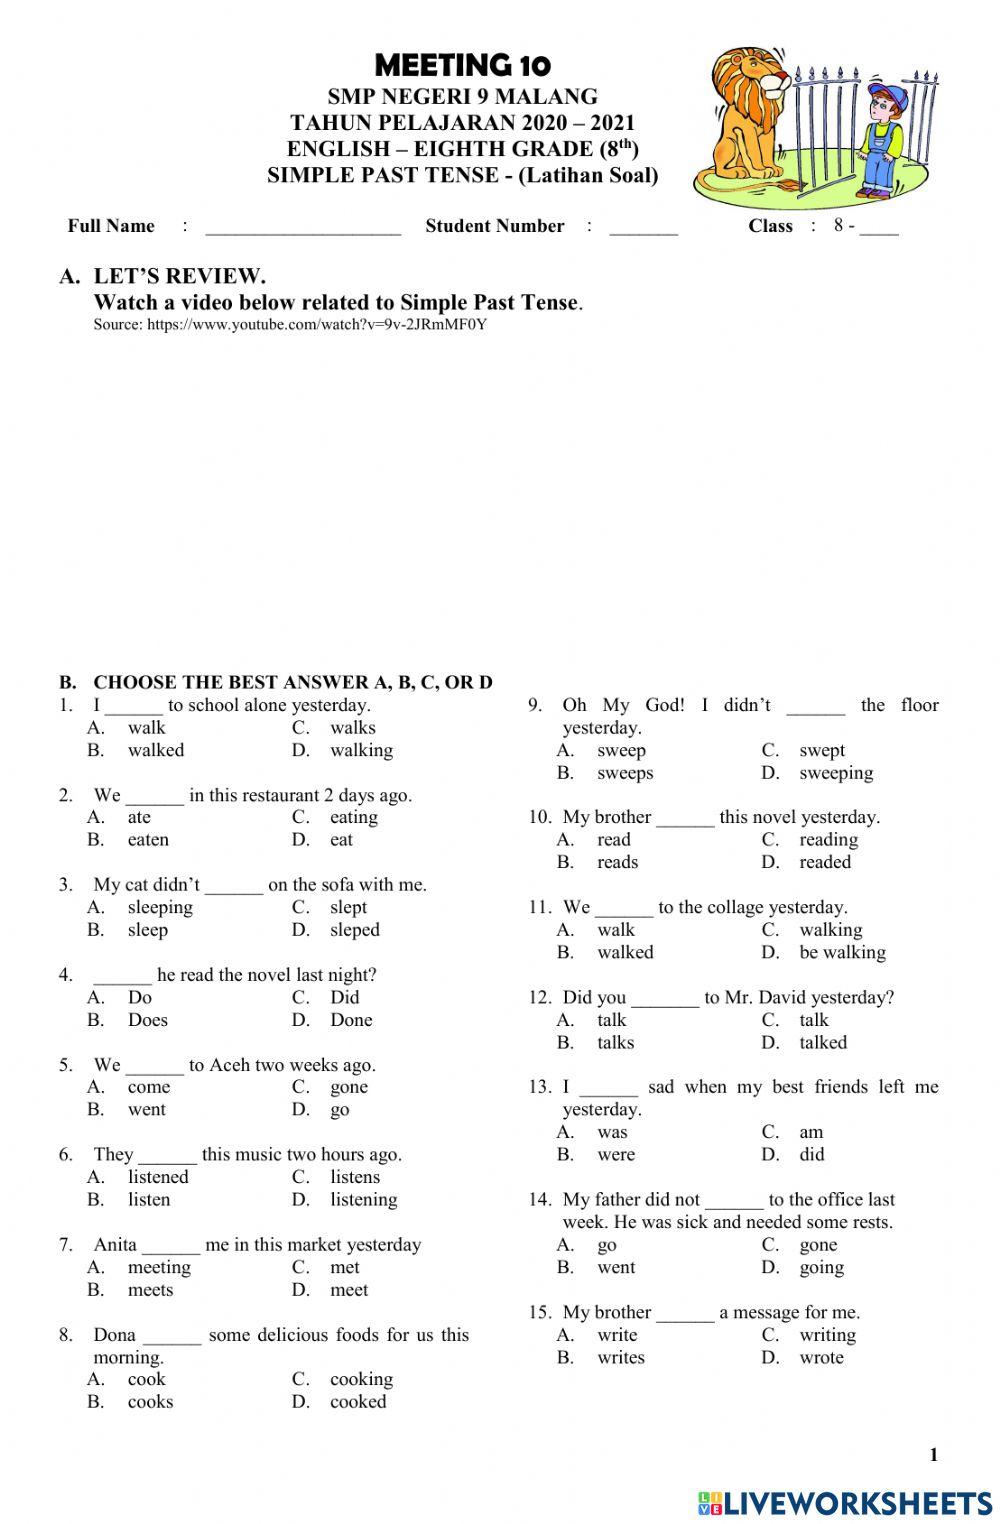 Meeting 10 - simple past tense (exercises)